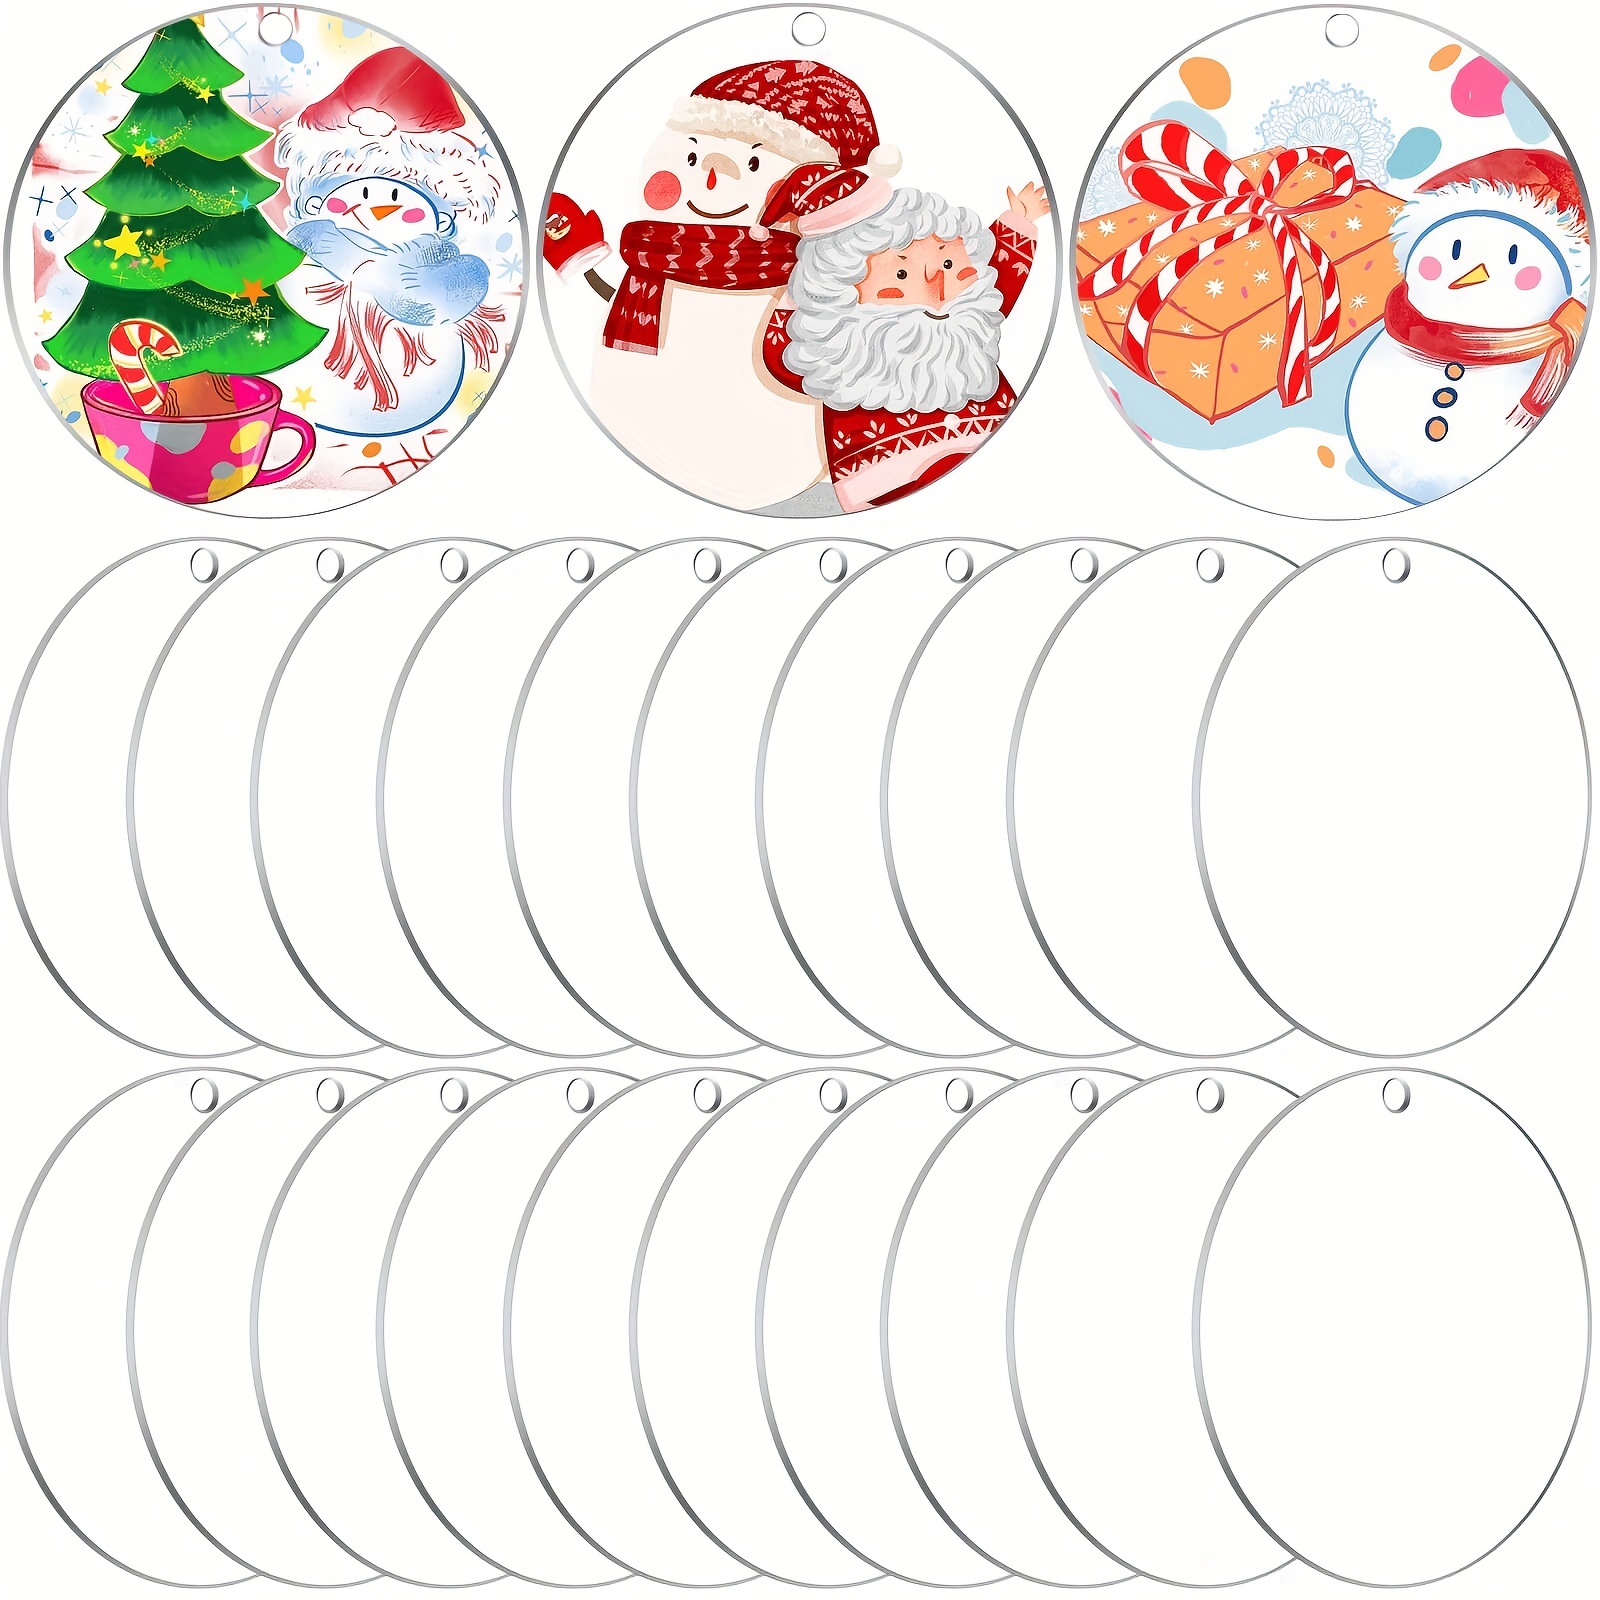 Acrylic Keychain Blanks Making Kit, PASEO 108Pcs Transparent Ornament Craft  Tassels Set Including Each 36Pcs 3-inch Round Clear Circle Disc, Key Jump